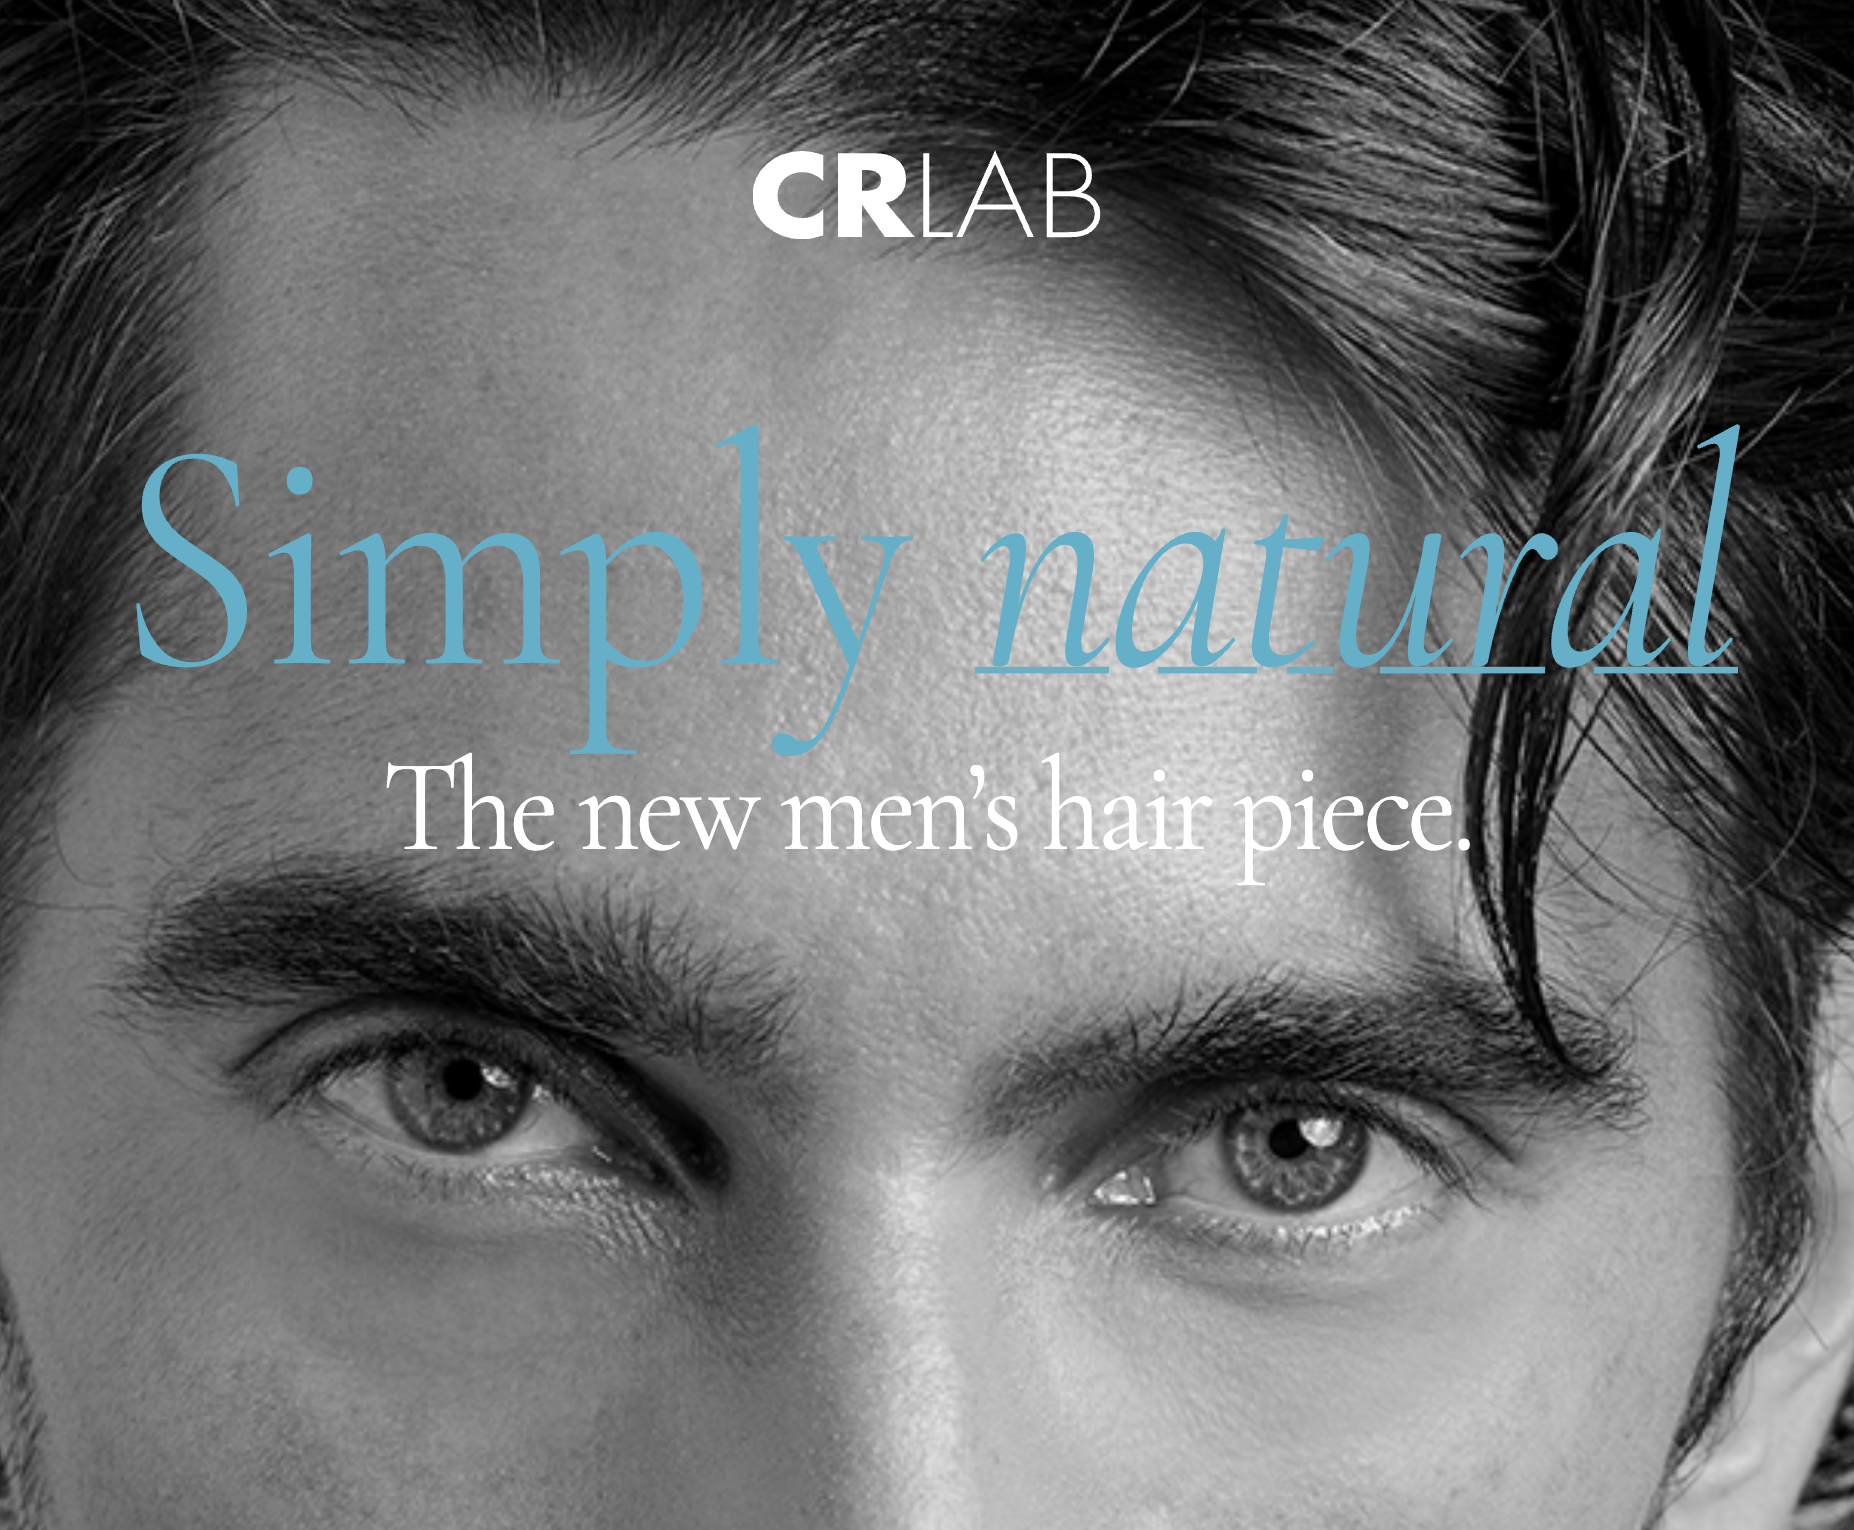 Read more about the article CRLabs “Simply Natural” Coming Soon!